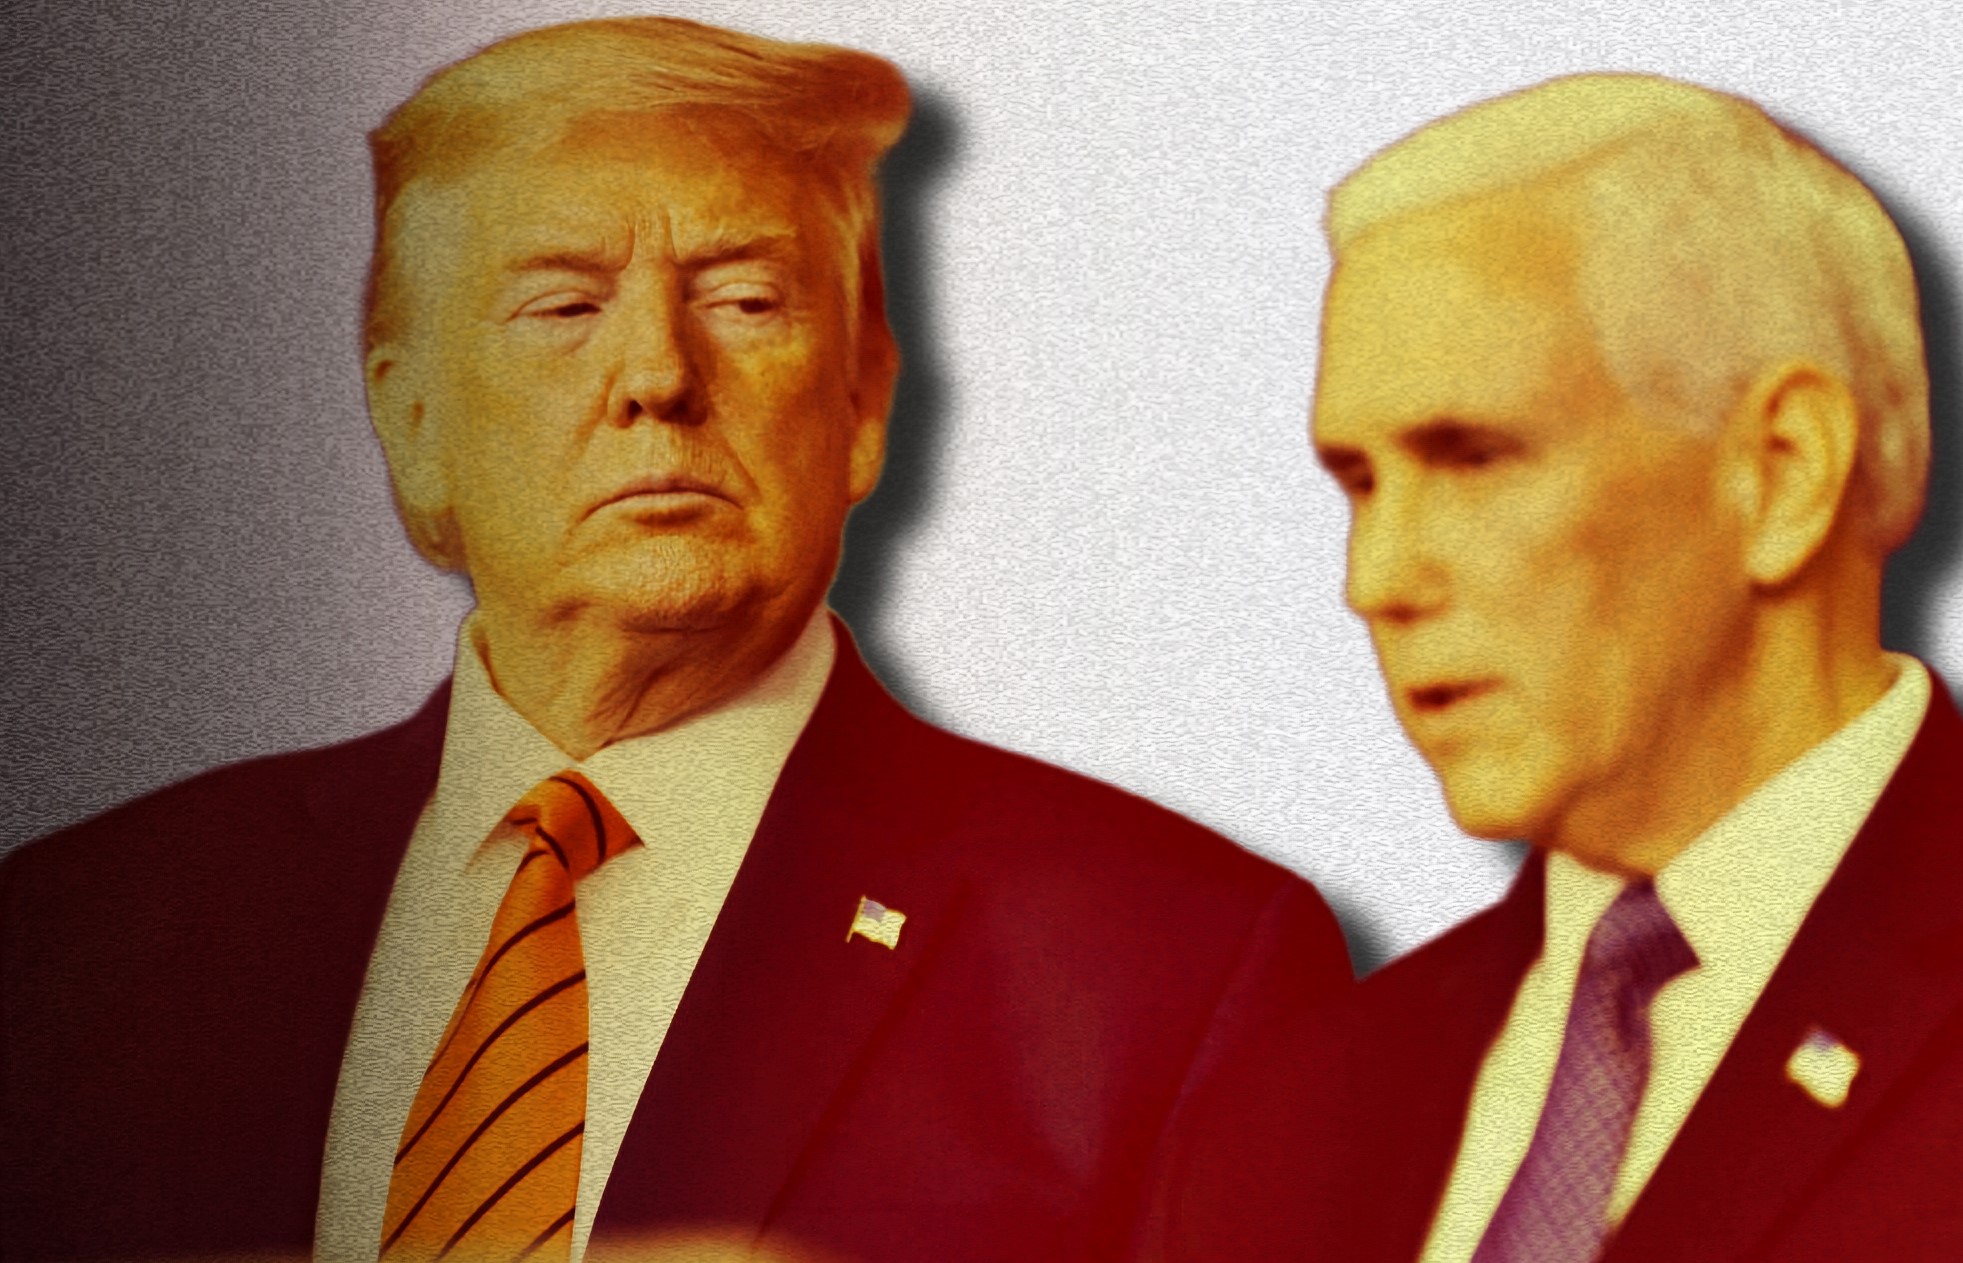 Photo edit of former President Donald J. Trump and former Vice President Mike Pence. Credit: Alexander J. Williams III/Pop Acta.